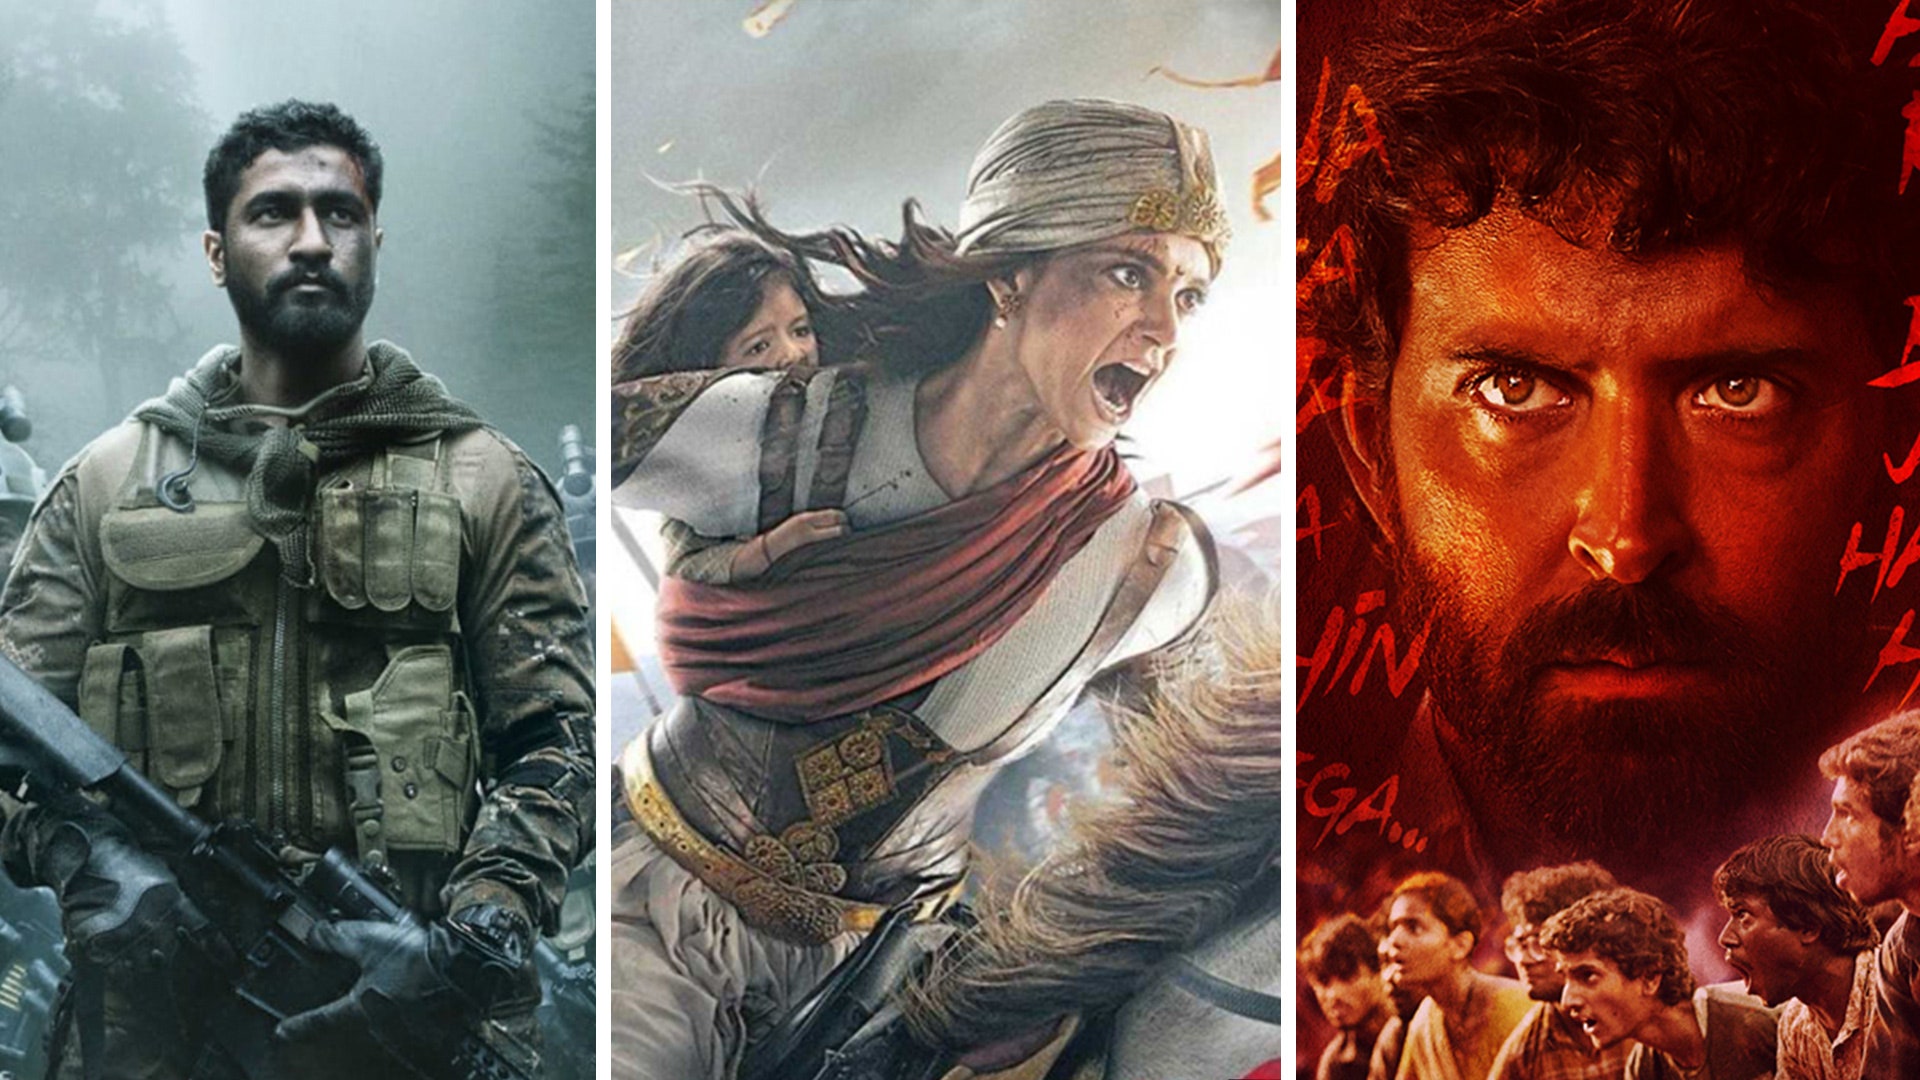 New Bollywood Movies in January 2019: All the Upcoming Movies to Look Forward To